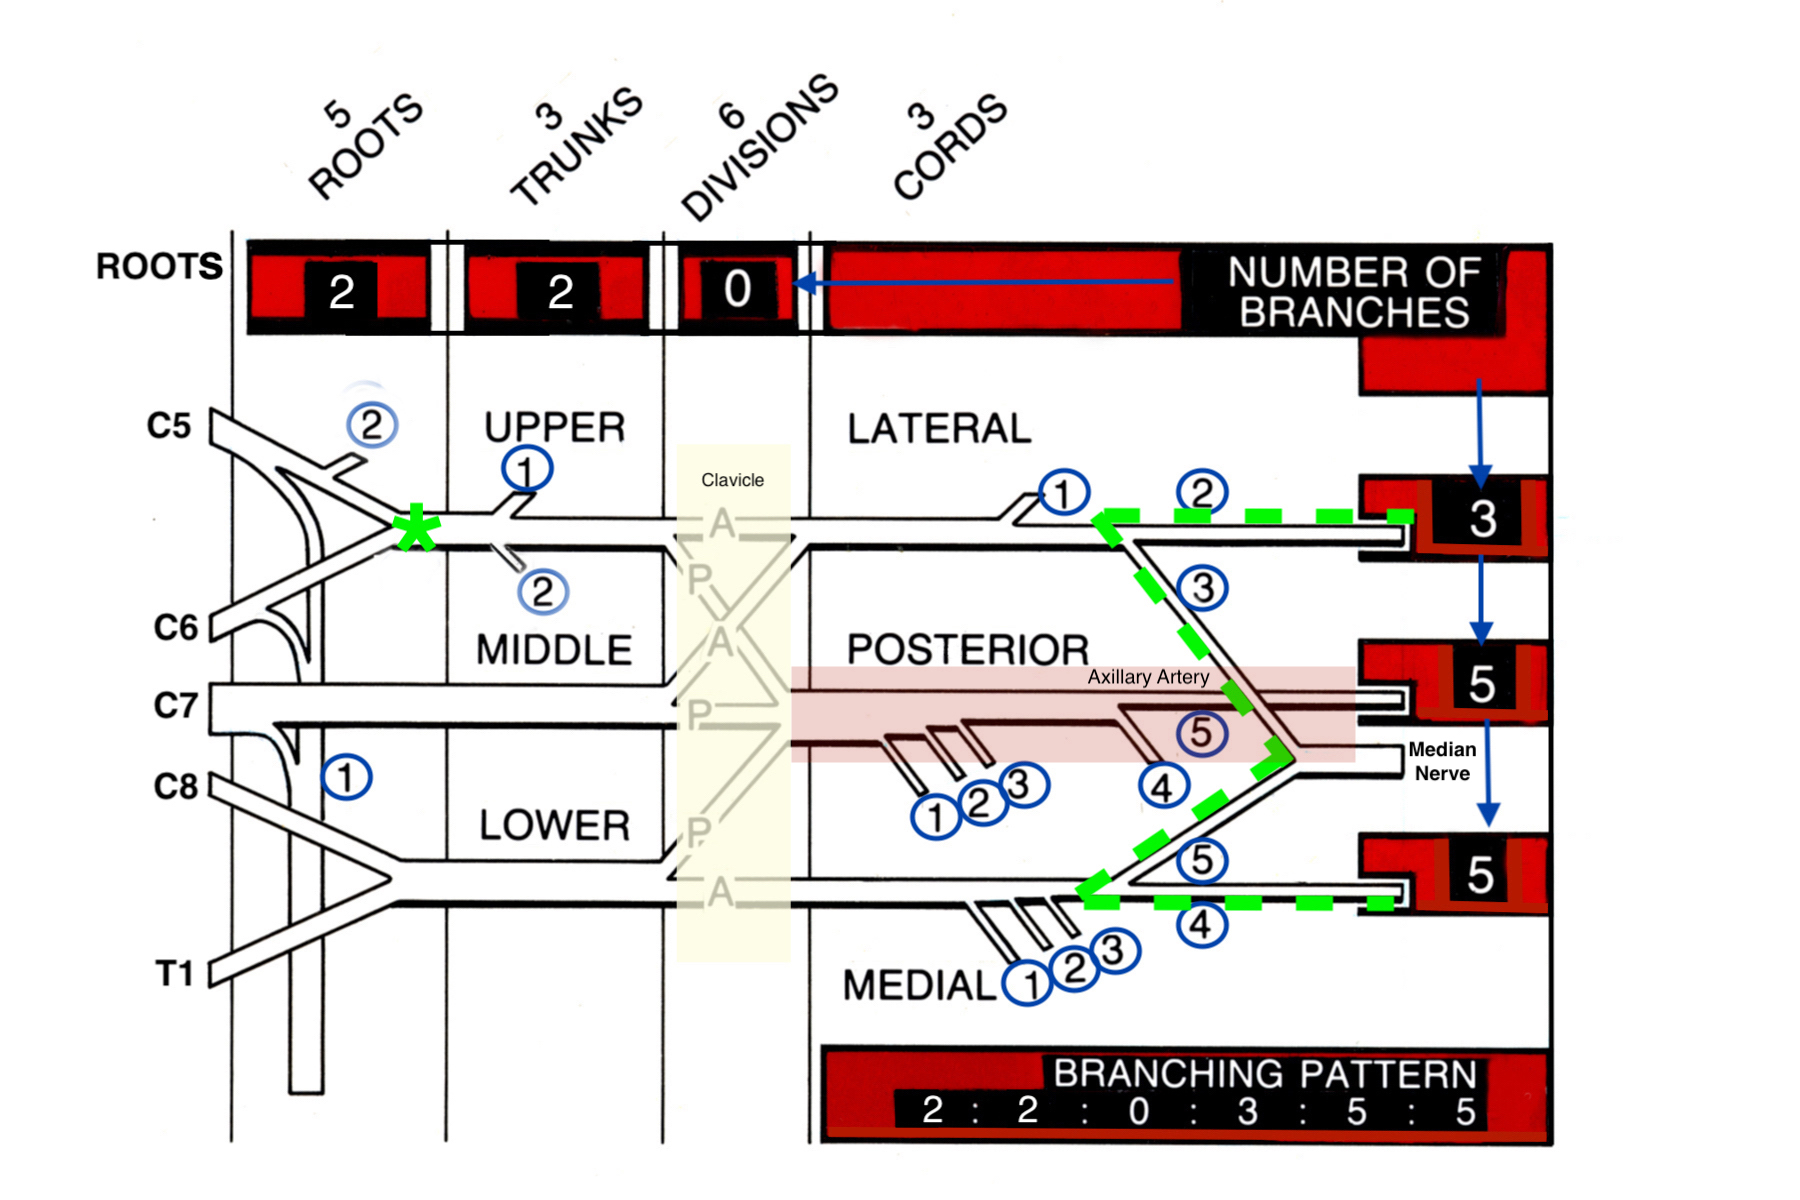  divisions & cords. (Remember RTDCBs - Running Together Down Country Byways). Also note the Nerve Branching  2 2 0 3 5 5 Rule for the number of branches from each part of the plexus. Also see the brachial plexus branching table in the next image. Note the green asterisk at Erb’s point.  Also note the brachial plexus “M” landmark shape anterior to the axillary artery which is defined by the musculocutaneous nerve, the median nerve and the ulnar nerve. Finally note the divisions of the brachial plexus posteri